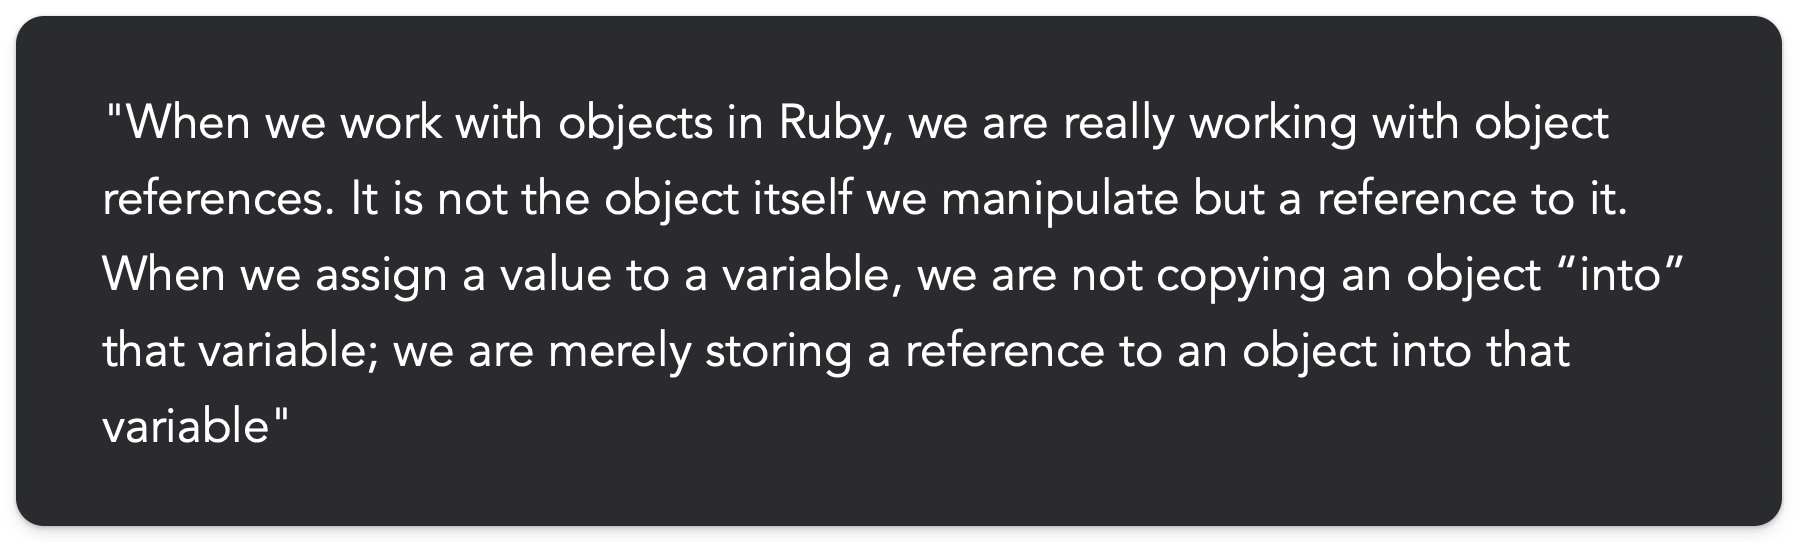 "When we work with objects in Ruby, we are really working with object references. It is not the object itself we manipulate but a reference to it. When we assign a value to a variable, we are not copying an object “into” that variable; we are merely storing a reference to an object into that variable"